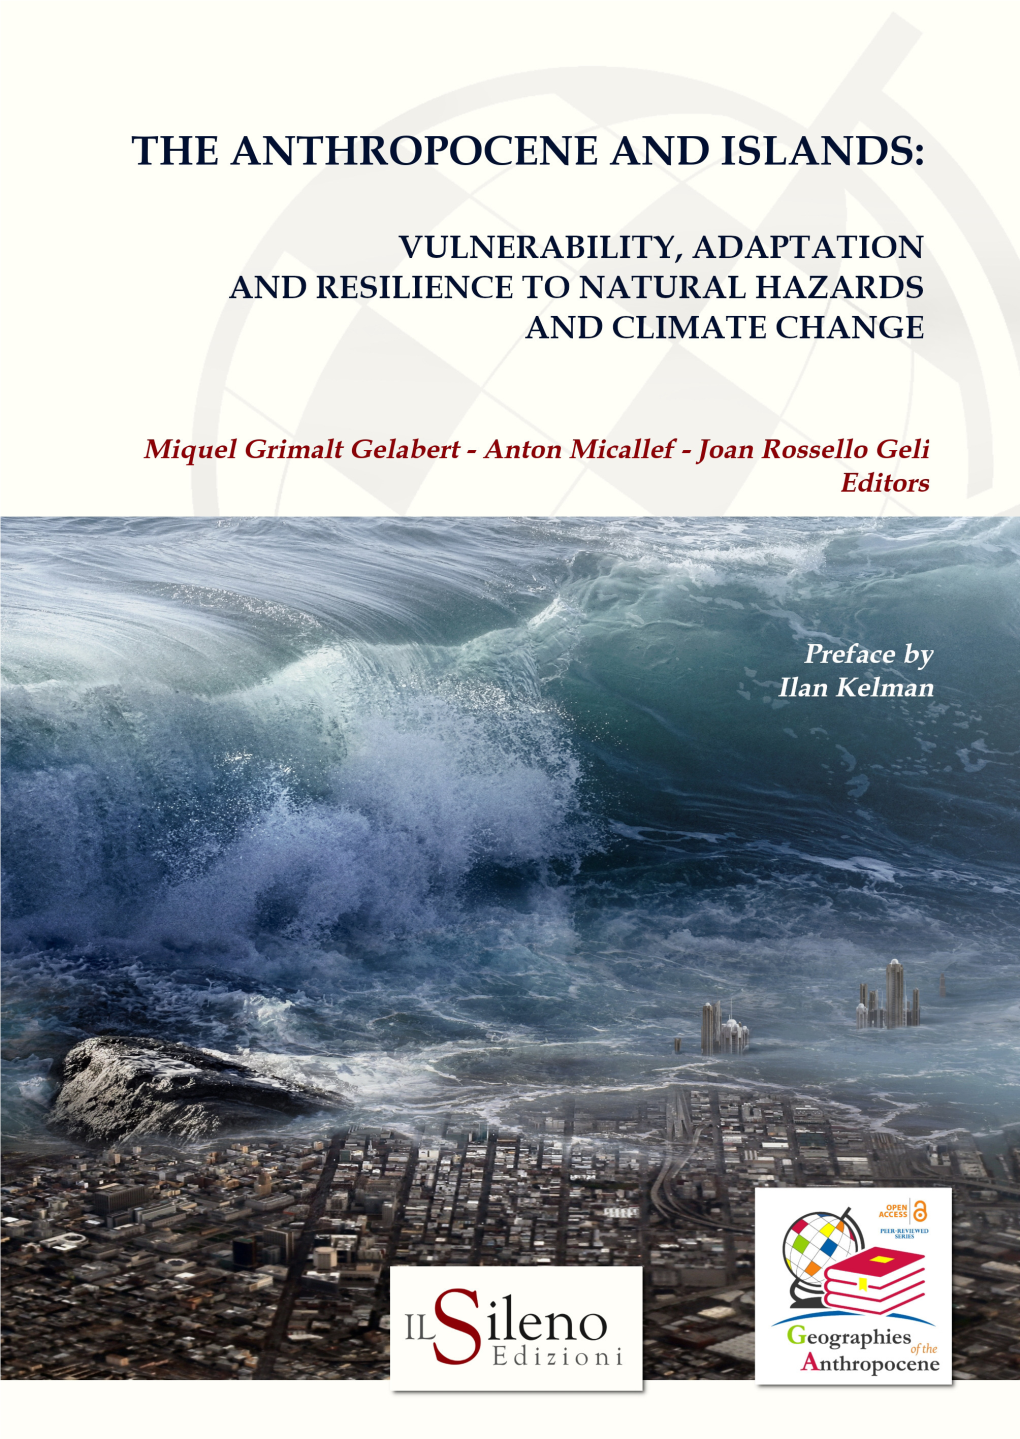 The Anthropocene and Islands: Vulnerability, Adaptation and Resilience to Natural Hazards and Climate Change